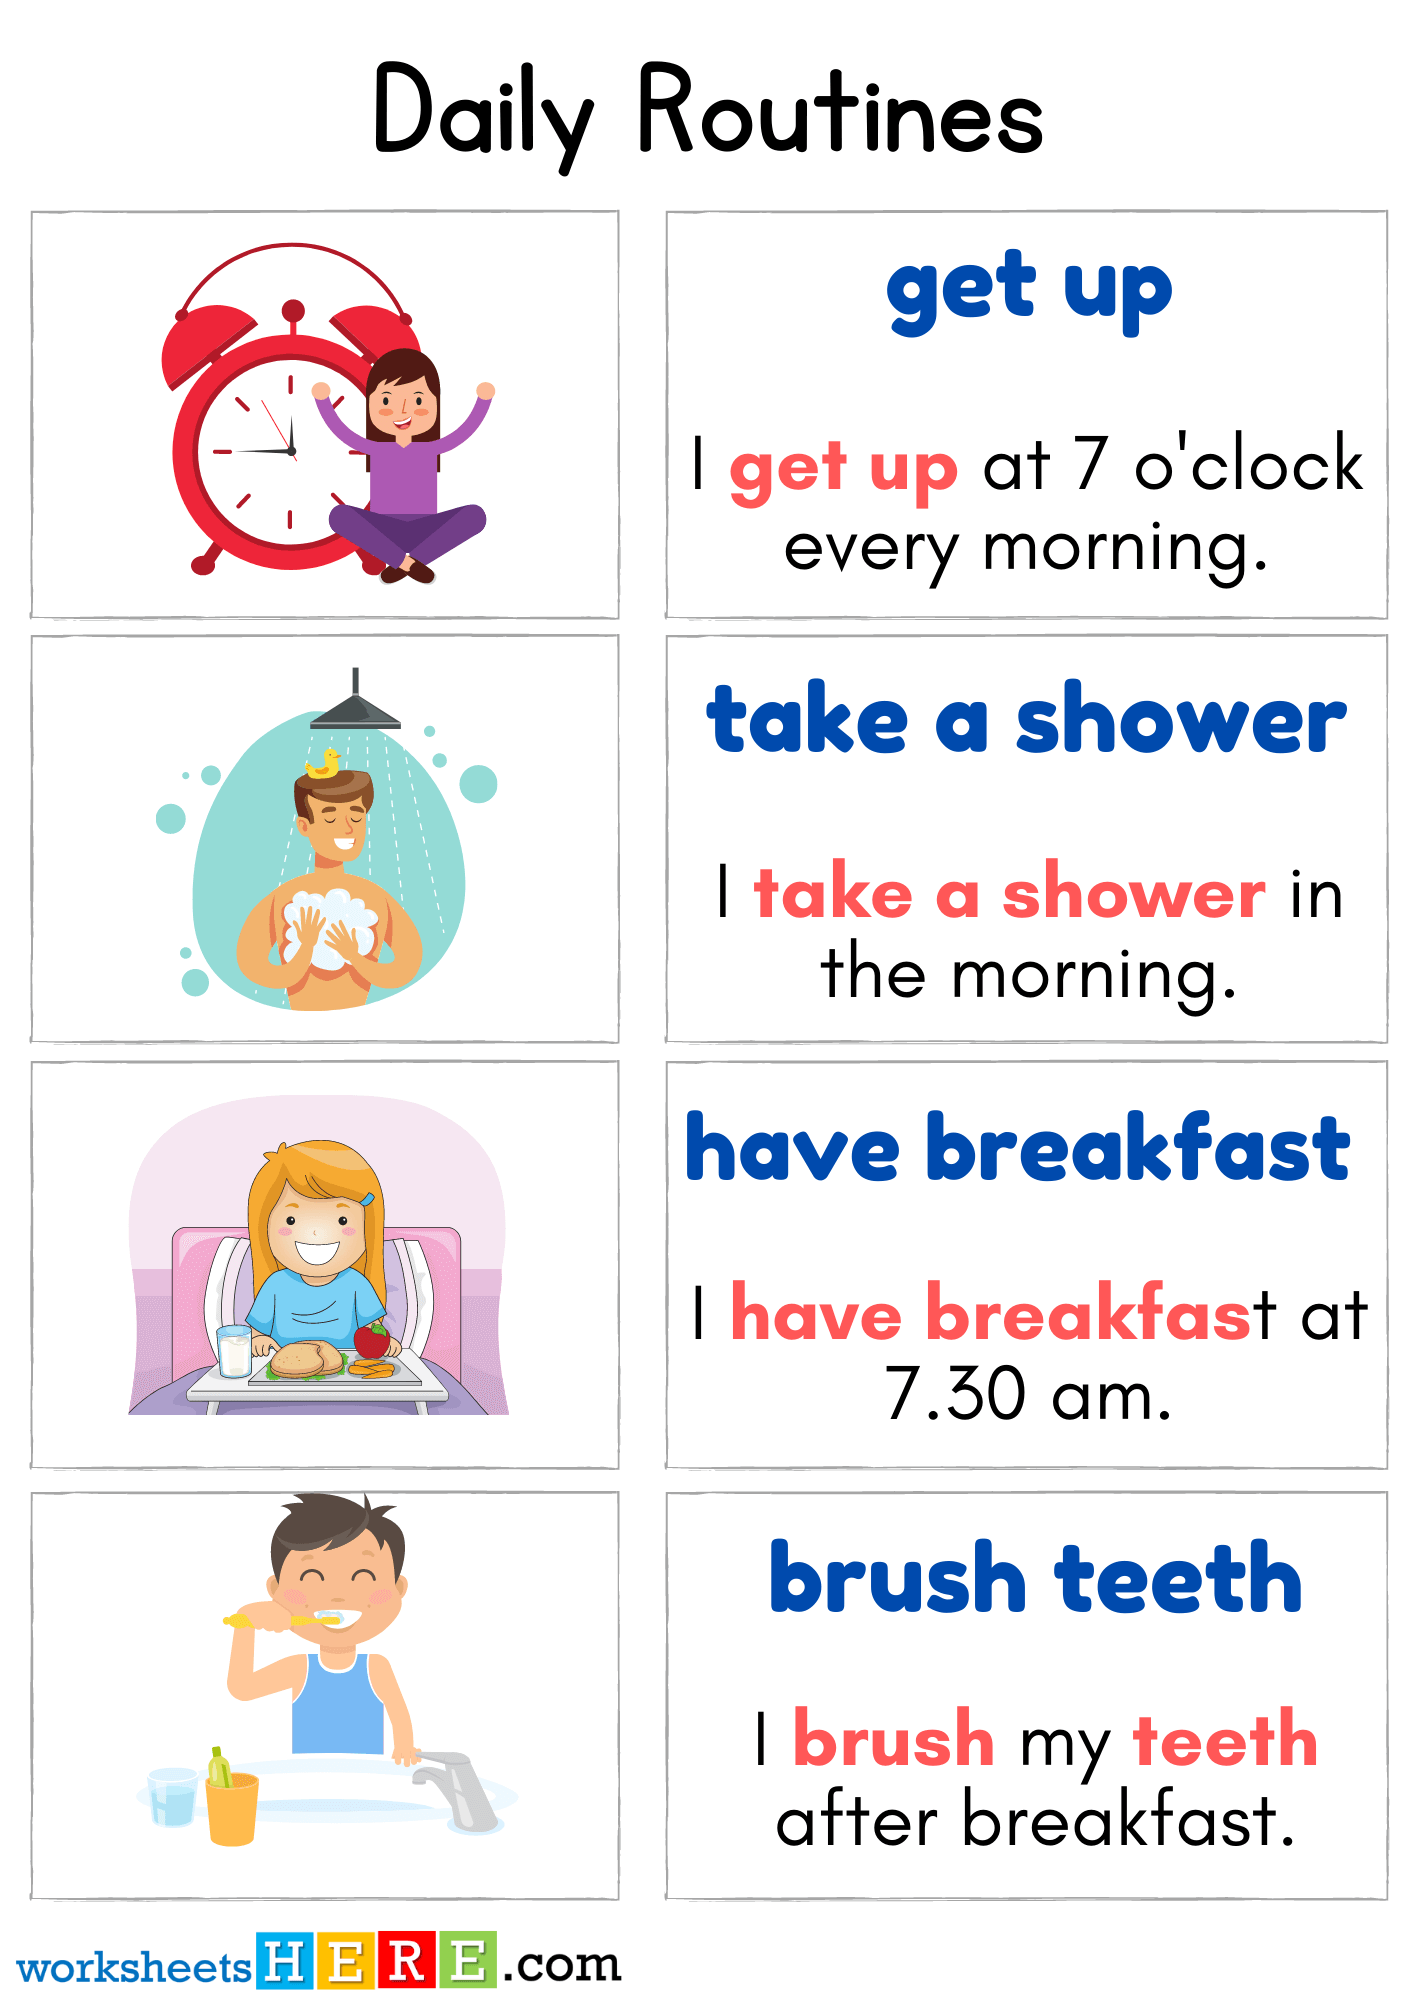 Daily Routines Verbs and Example Sentences with Pictures PDF Worksheet For Kids